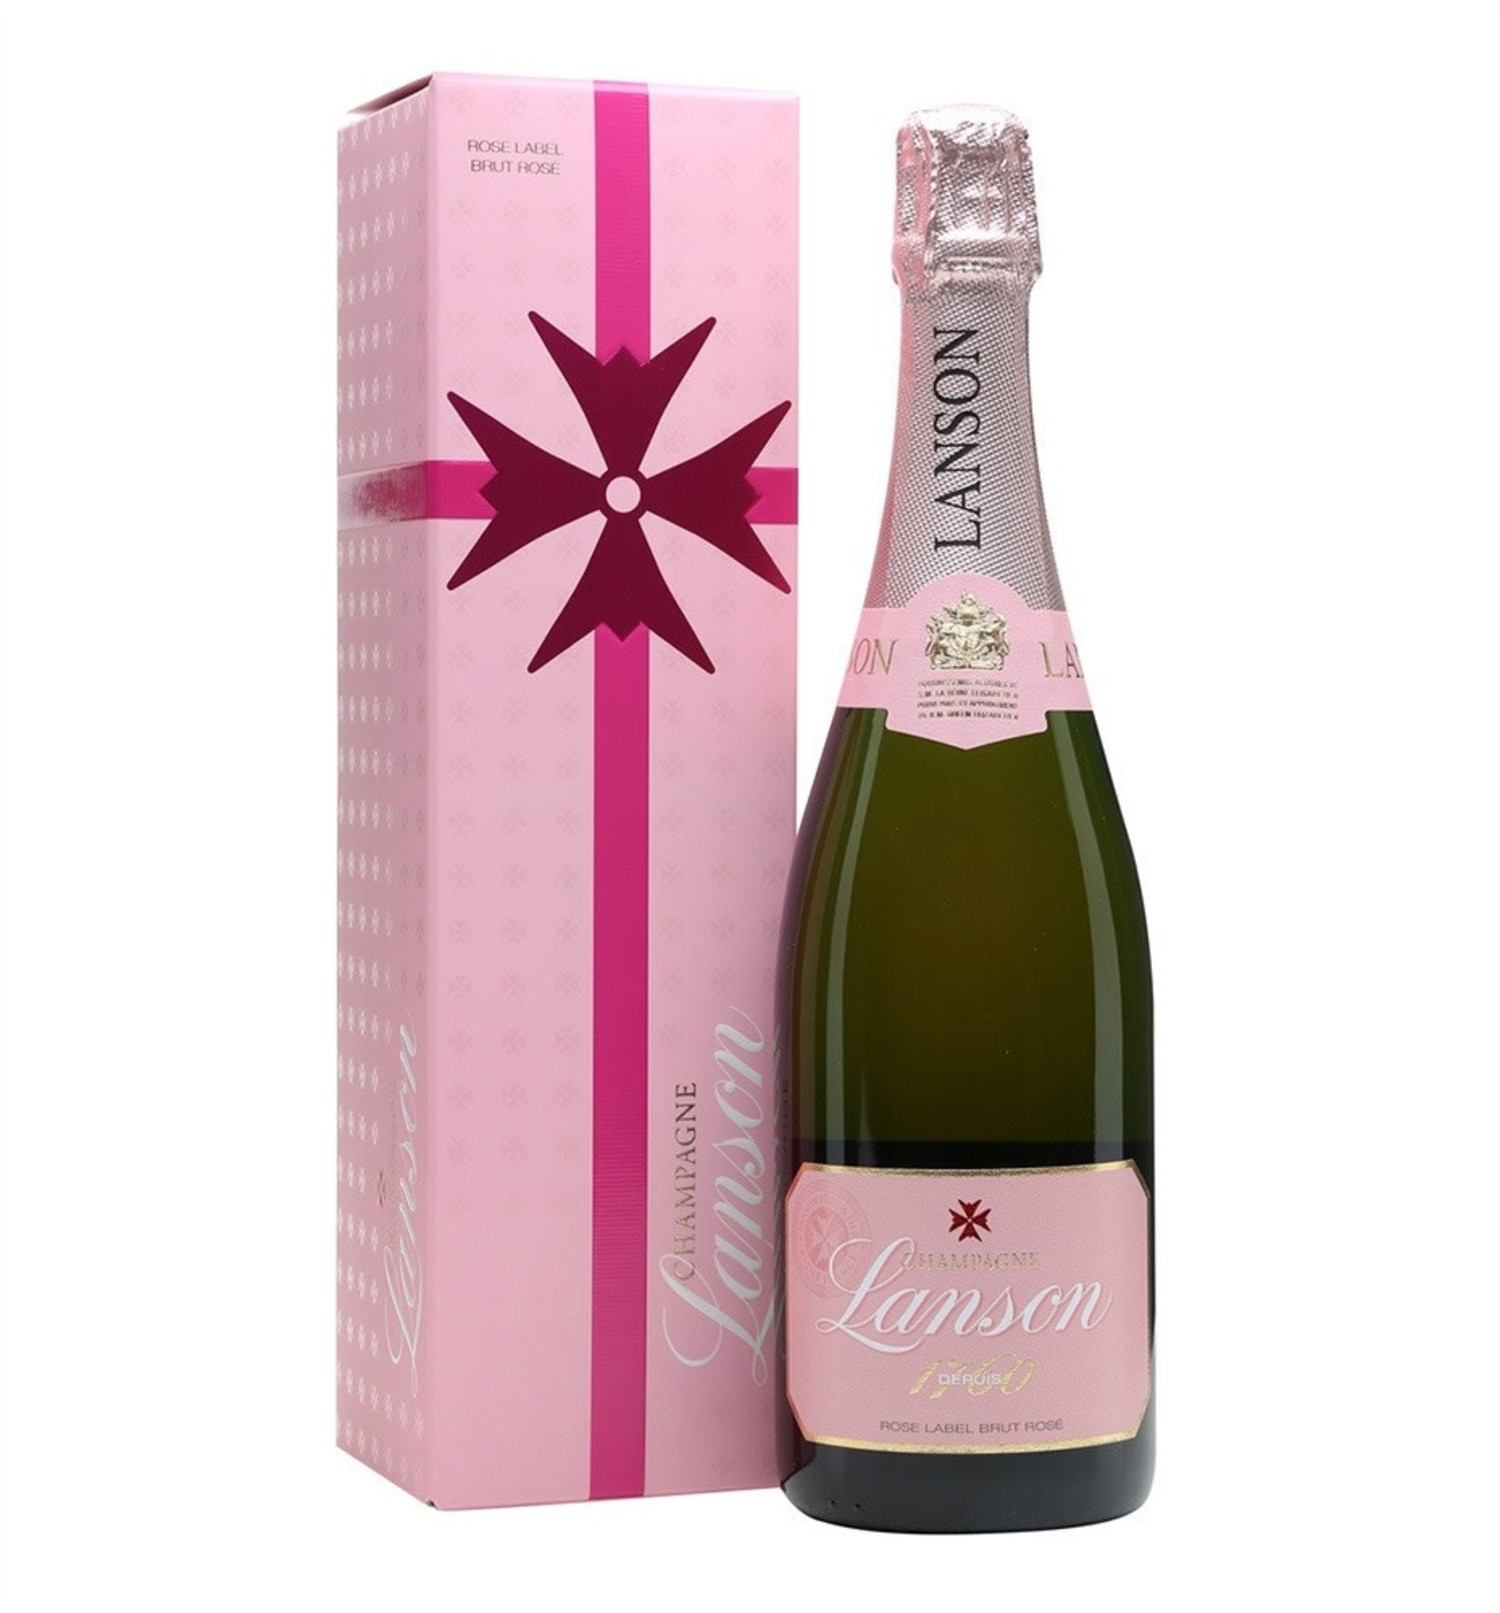 Brut - FREE box Uncle Rose $56 Lanson DELIVERY NV Fossil Wine&Spirits Gift